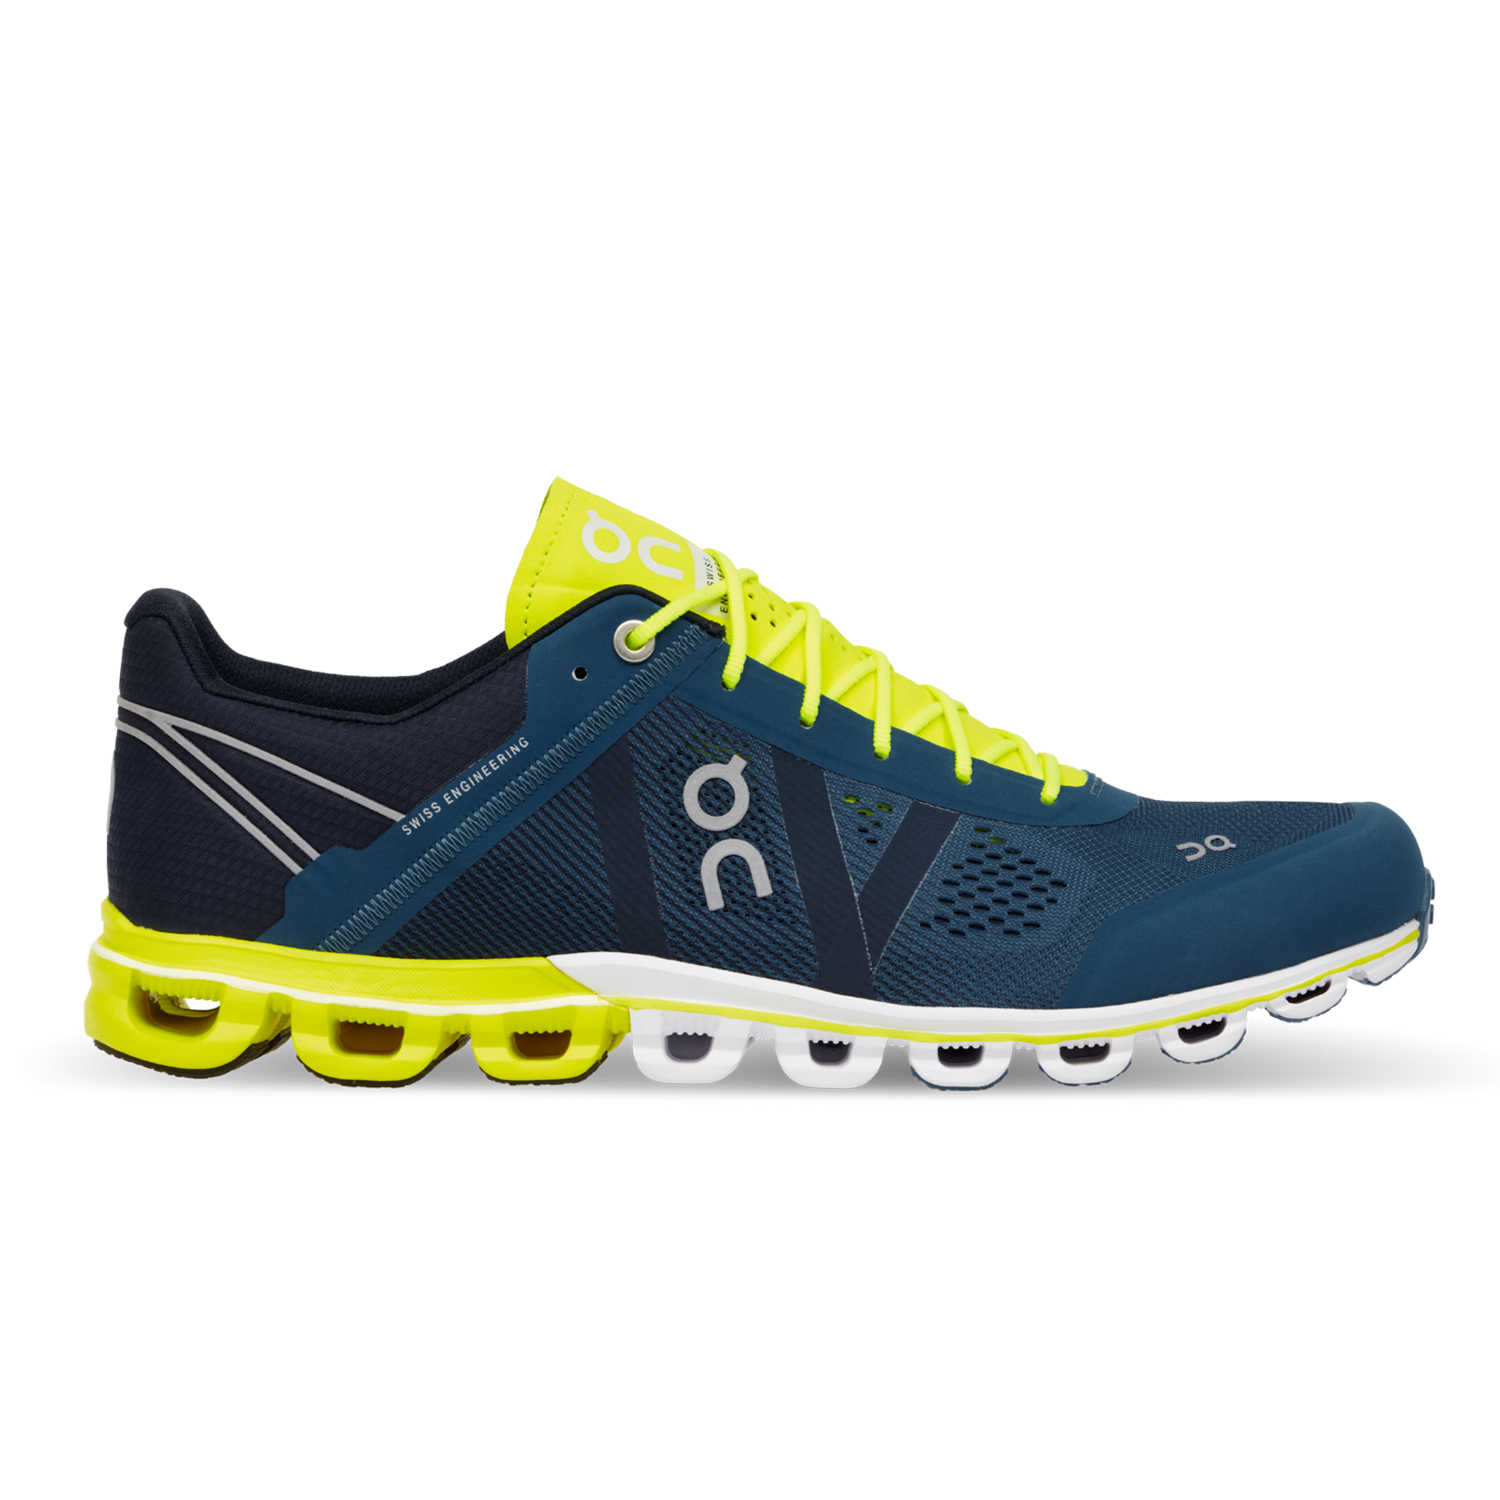 Chaussures Running Homme Cloudflow - Petrol/Neon